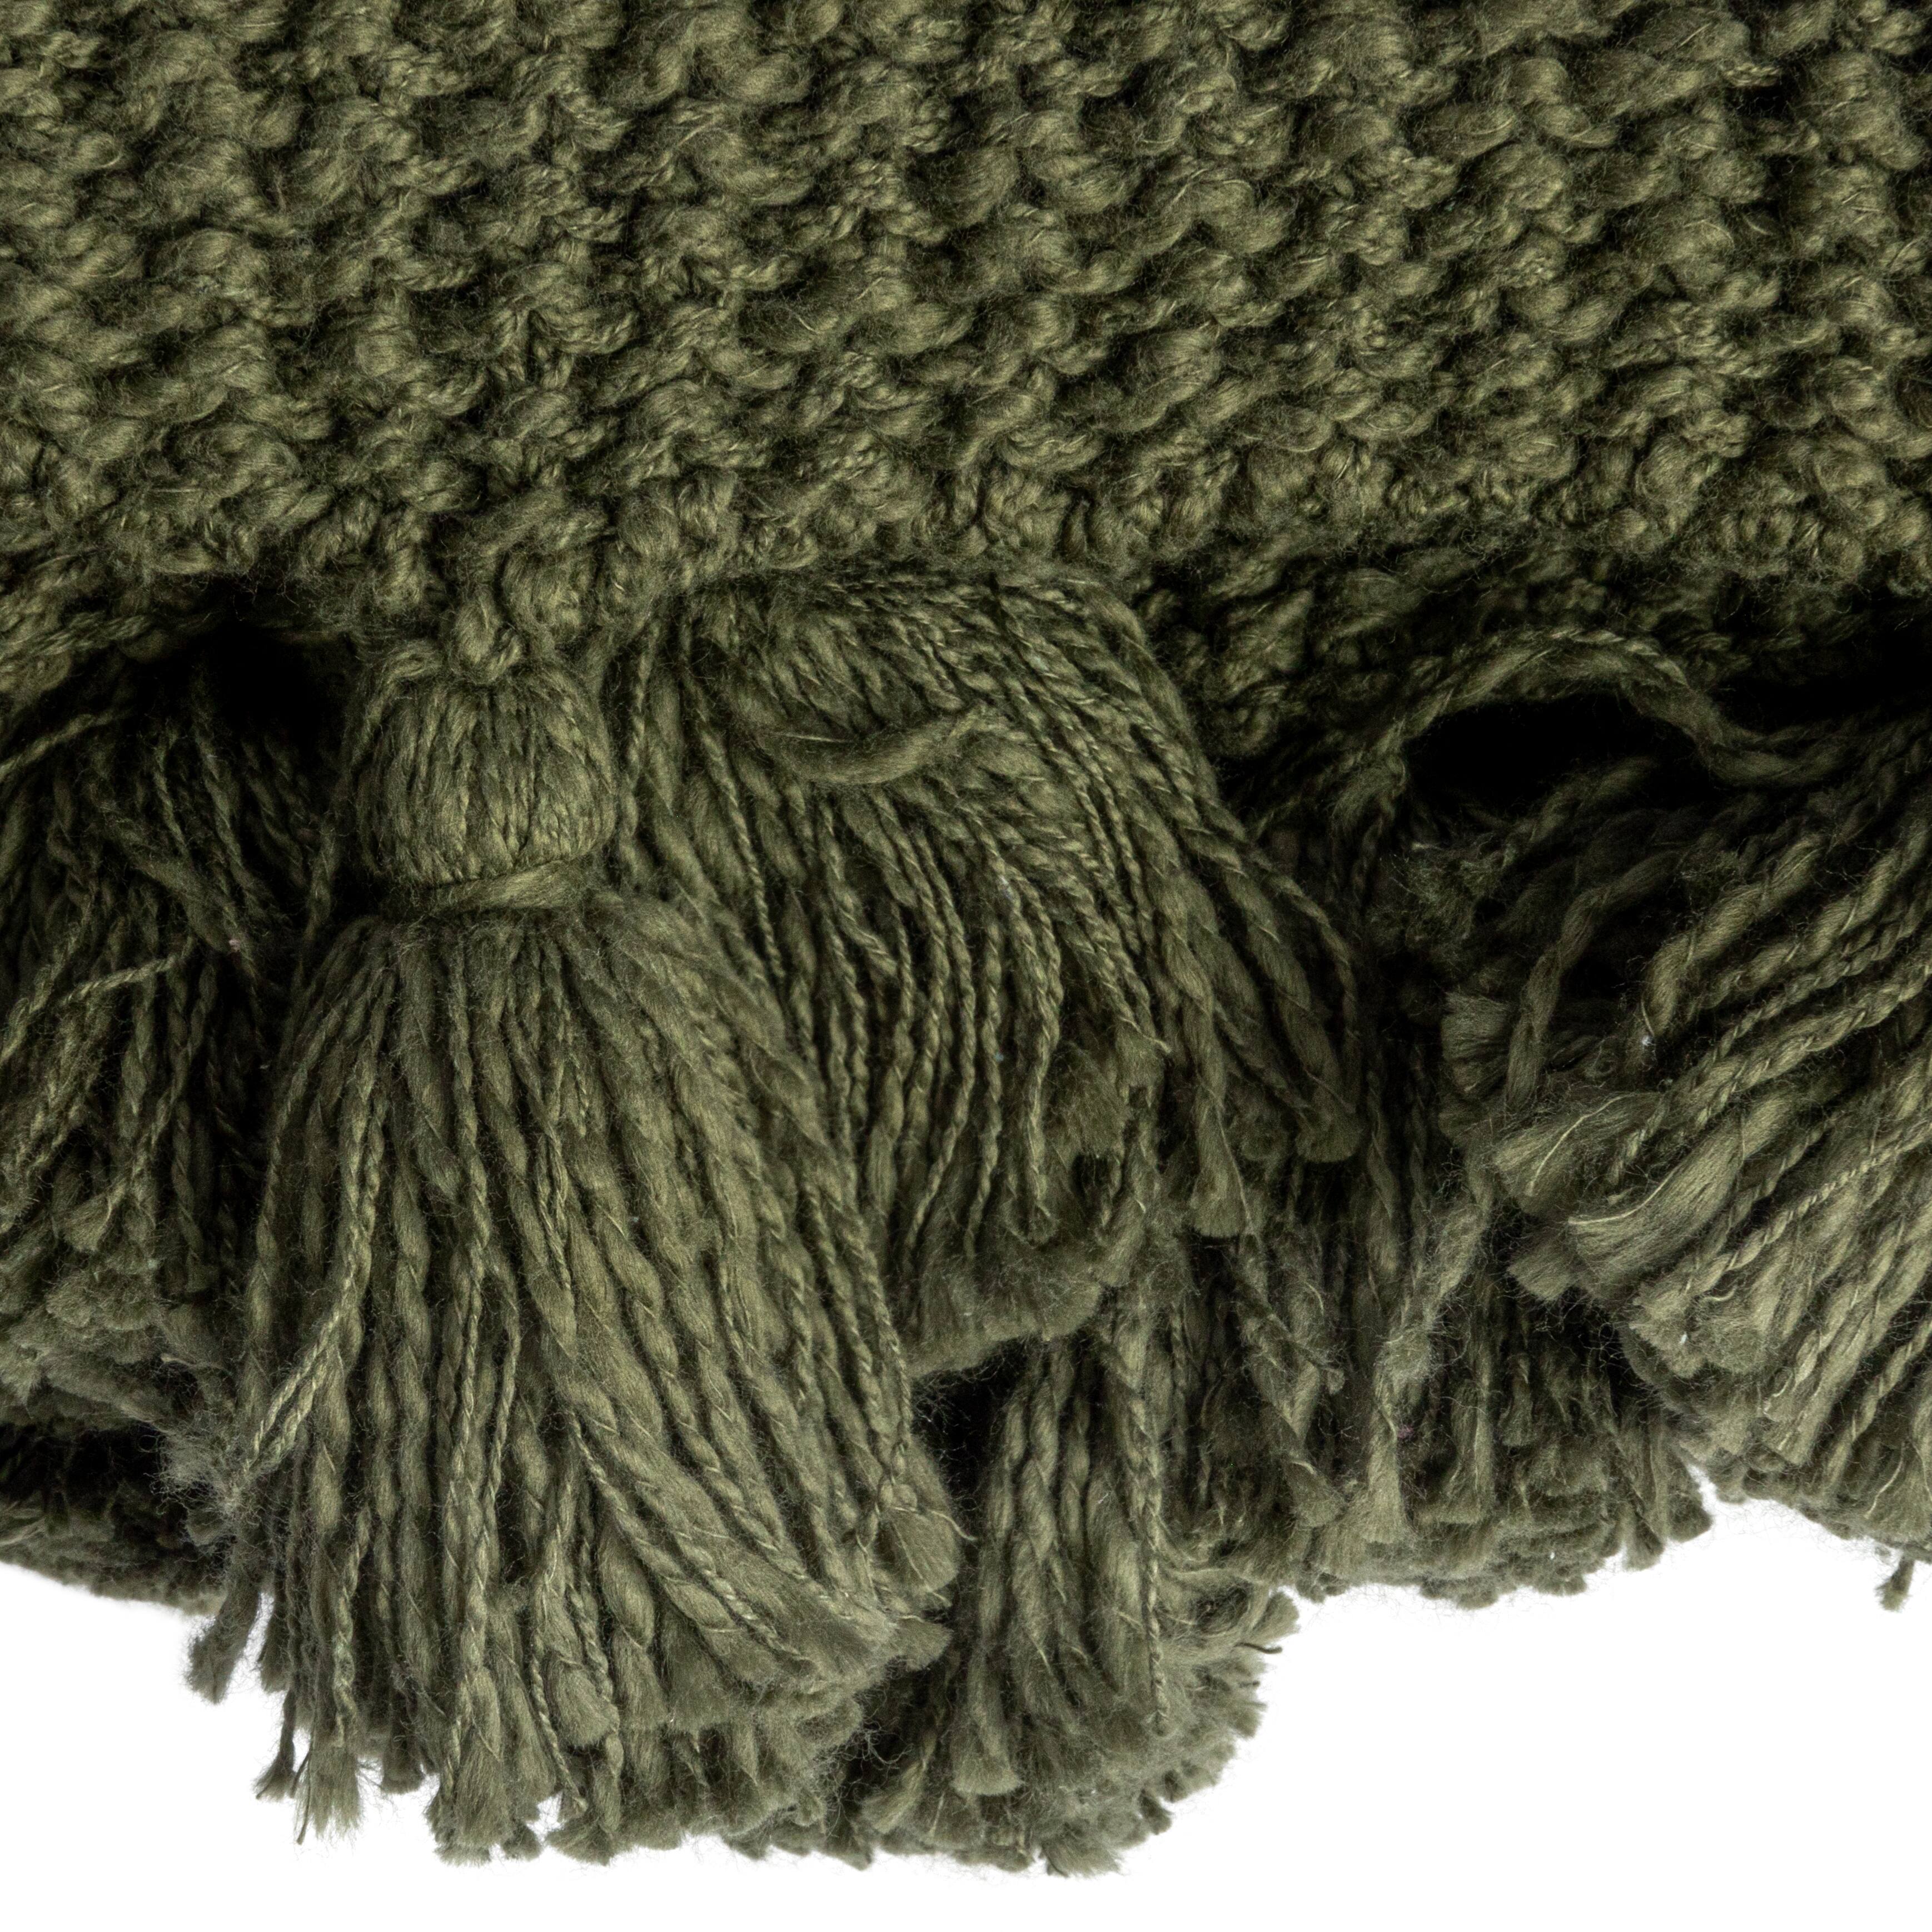 Olive Green Knit Throw Blanket with Tassels